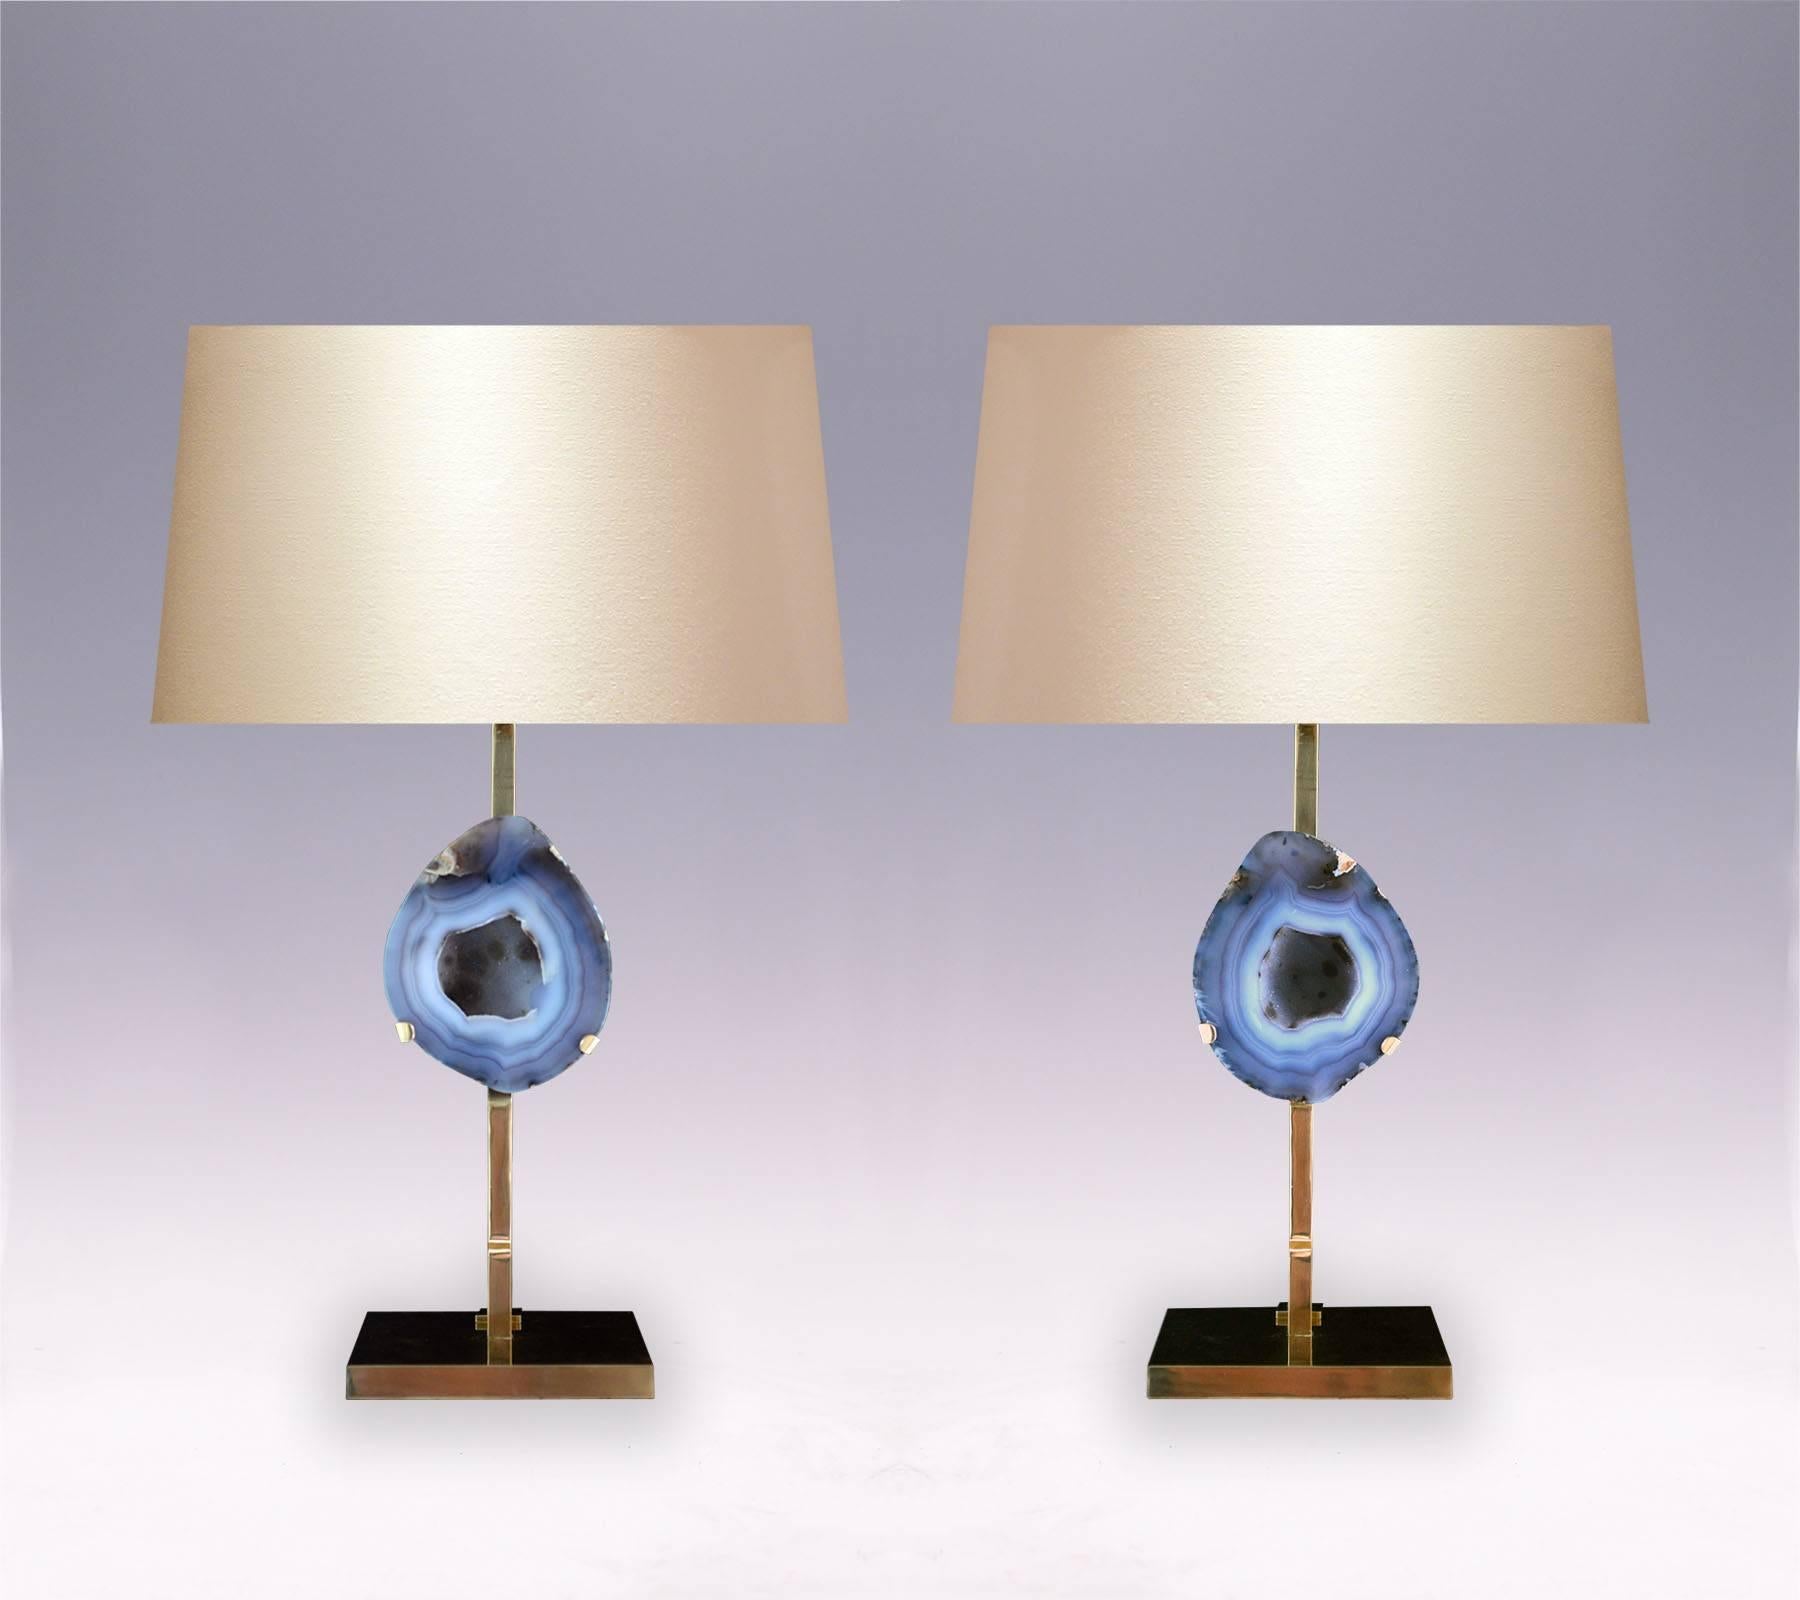 A pair of natural rare grey-blue agate lamps with polished brass mount.
(Lampshade not included)
